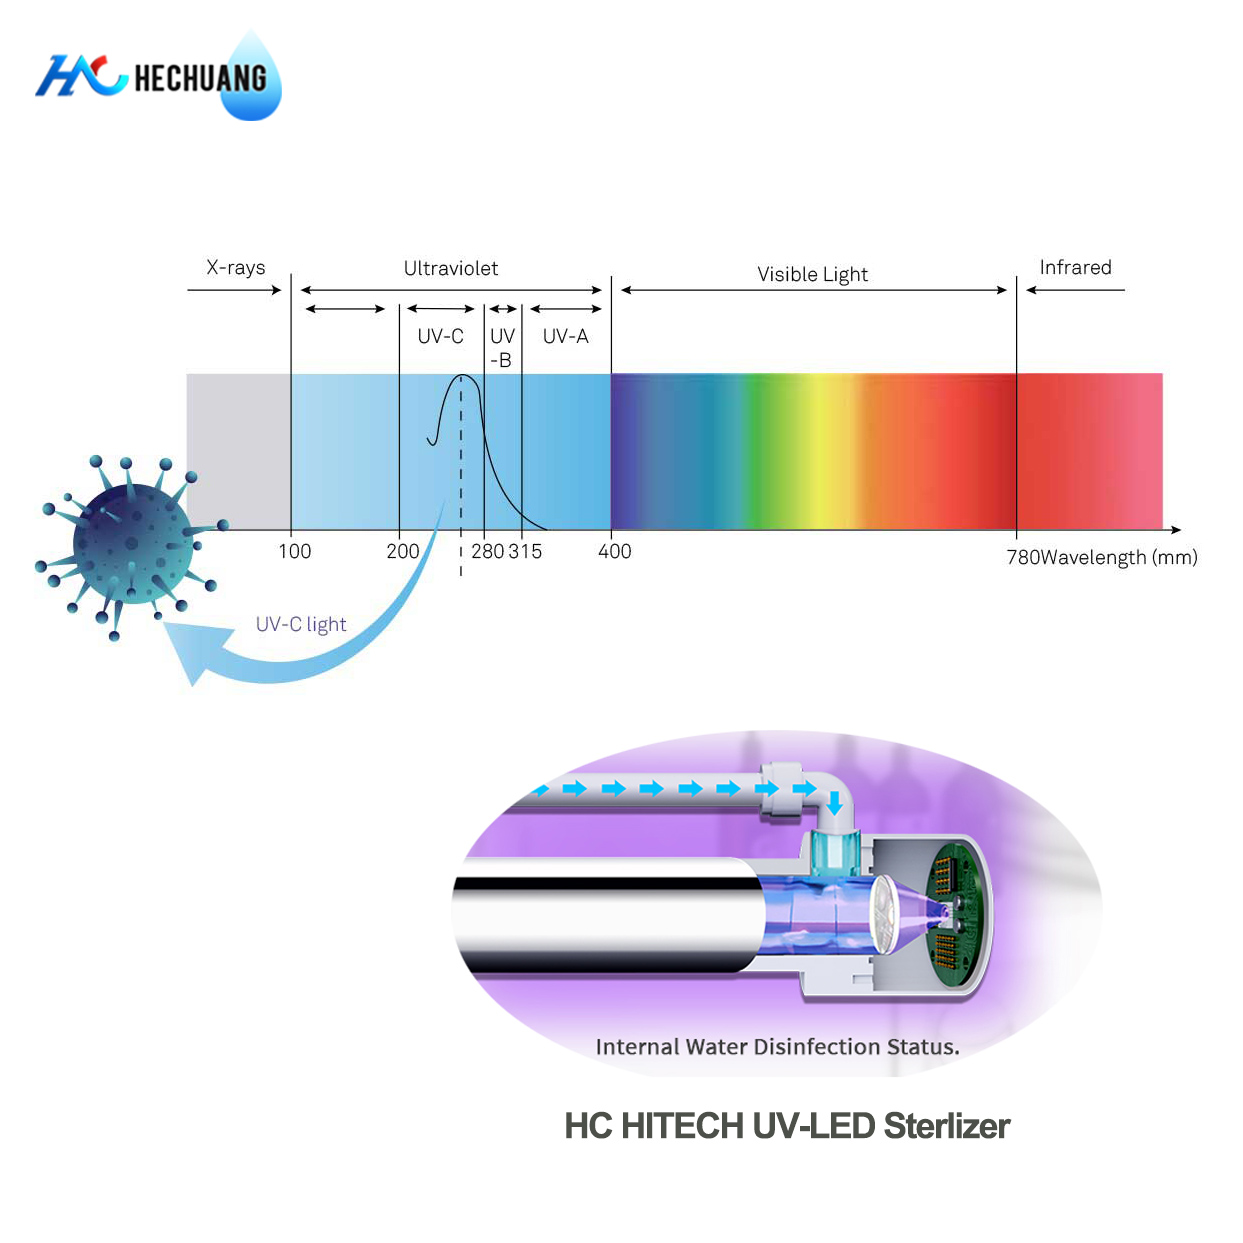 UV disinfection is effective at wavelengths from 250 nm to 280 nm. The UVC radiation emitted has a strong bactericidal effect. It is absorbed by...